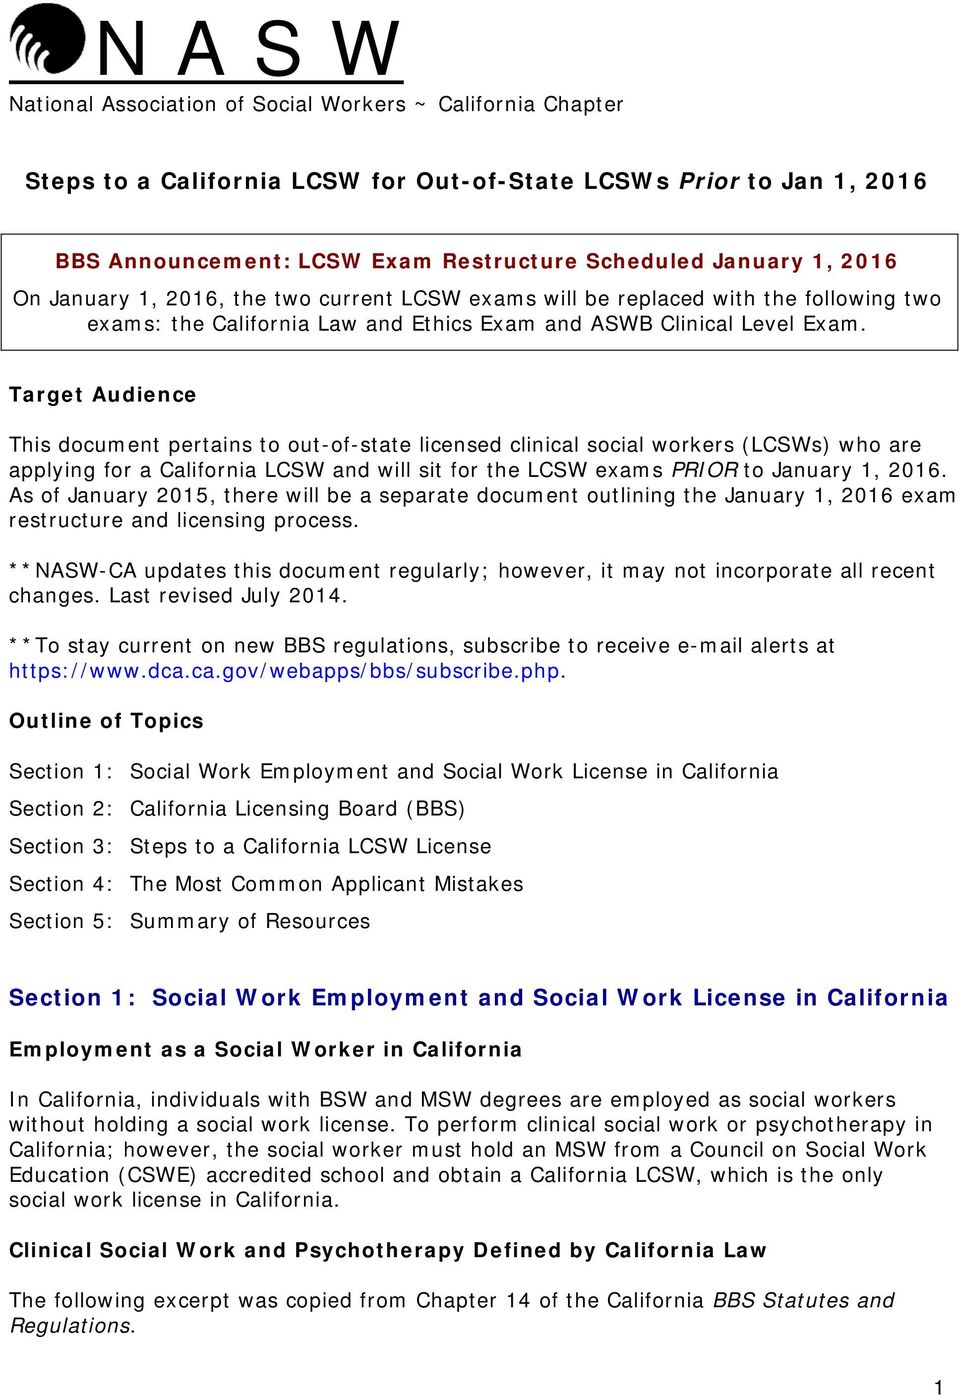 Target Audience This document pertains to out-of-state licensed clinical social workers (LCSWs) who are applying for a California LCSW and will sit for the LCSW exams PRIOR to January 1, 2016.